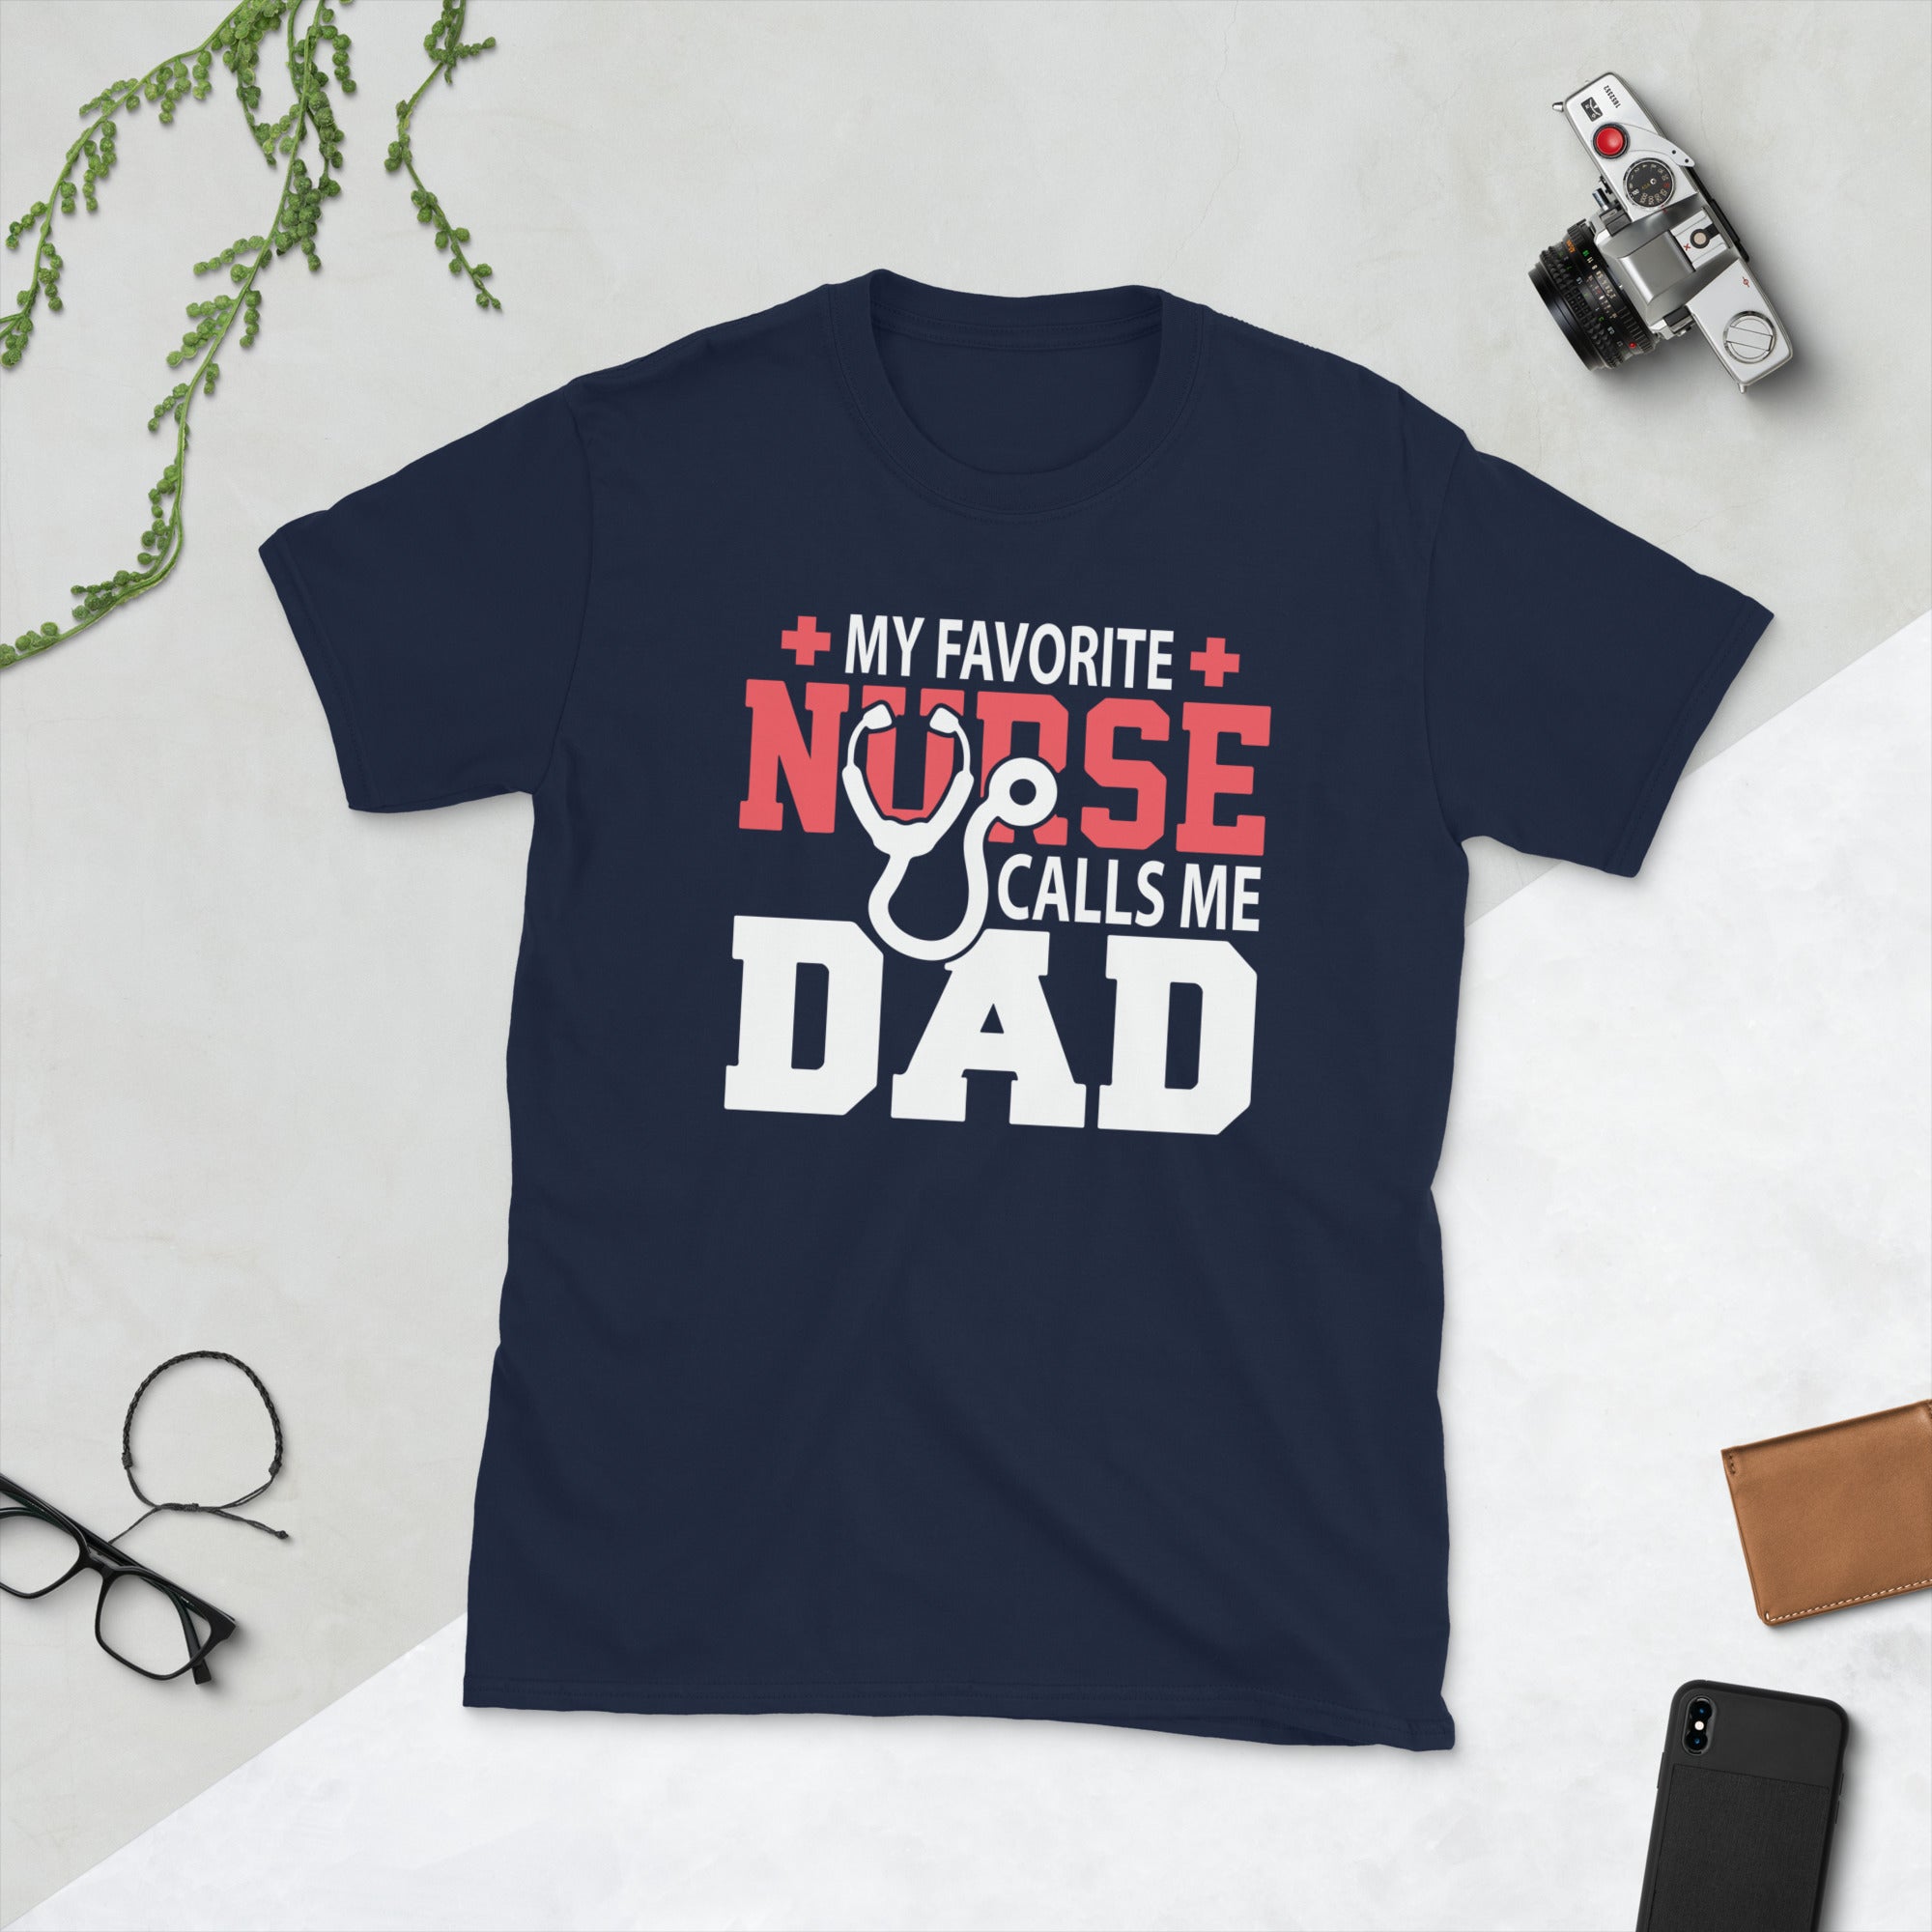 My Favorite Nurse Calls Me Dad Shirt, Birthday Fathers Day Gift for Proud Dad of a Nurse, Nurse Dad Shirt, Father Daughter Nurse Gift Shirt - Madeinsea©